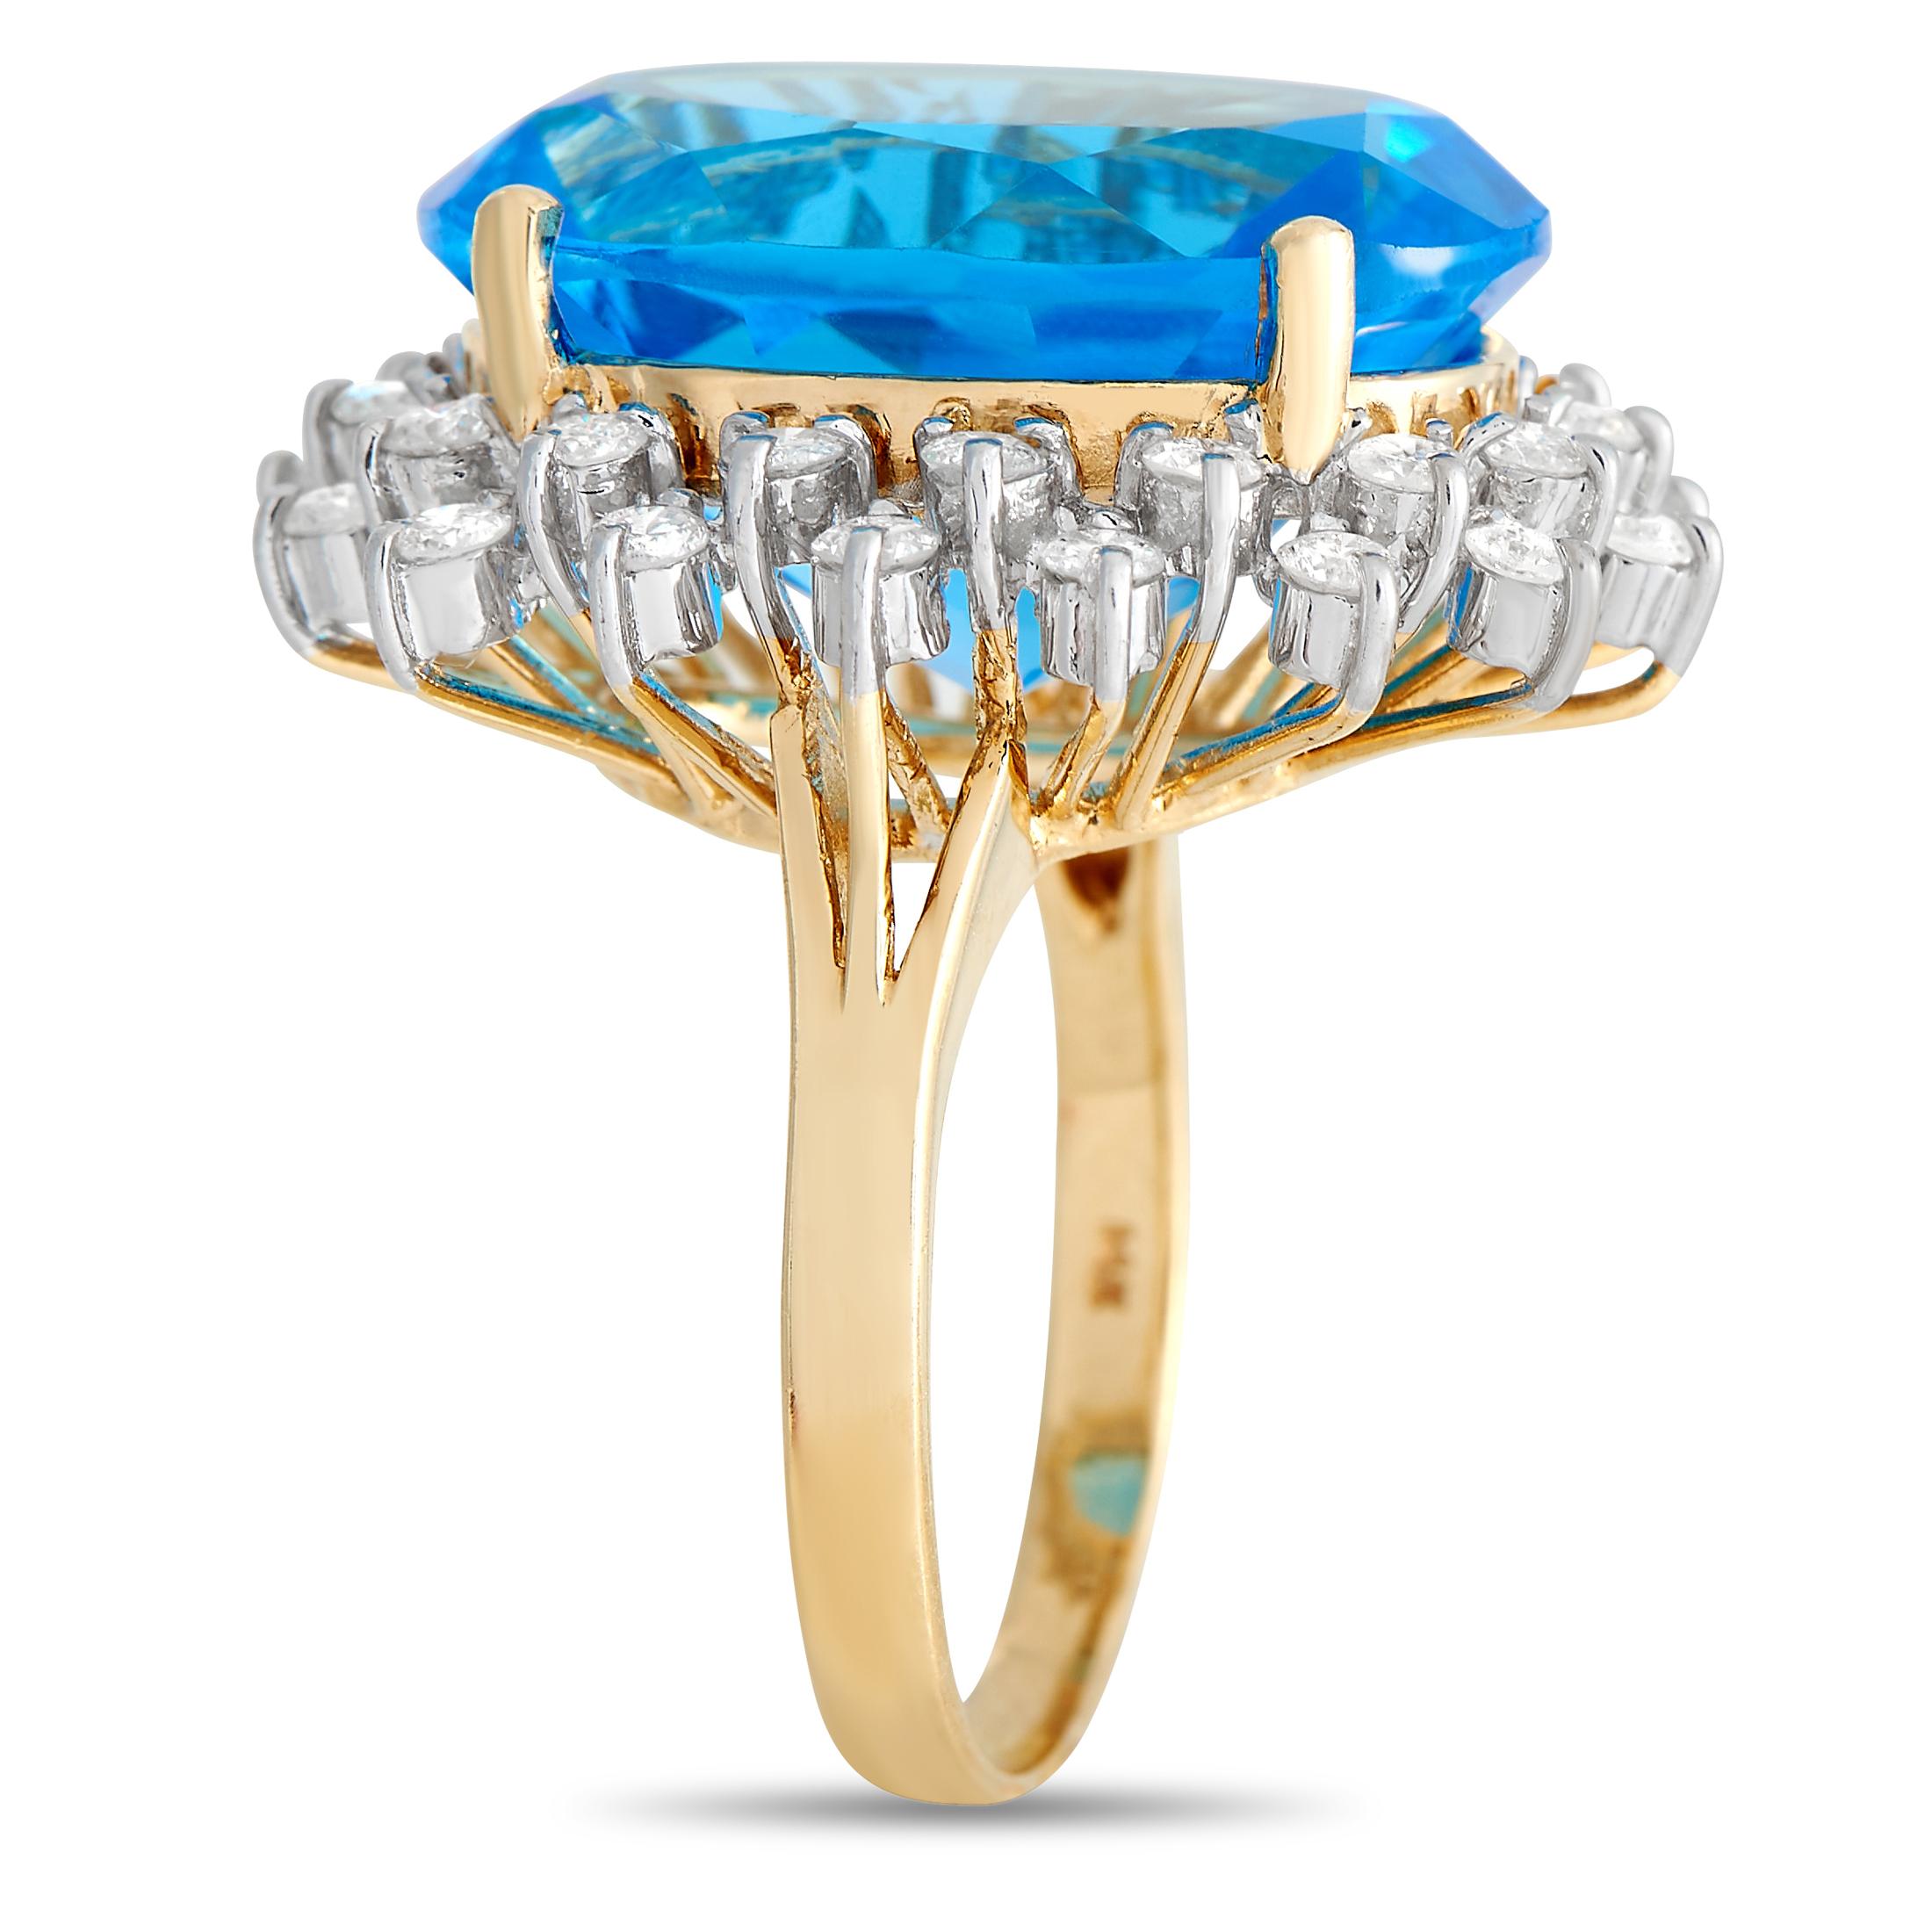 A halo of diamonds totaling 1.10 carats surrounds a large bright blue 12.60 carat topaz gemstone. The 14K yellow setting beautifully compliments the impressive topaz at the center. This jewelry piece is offered in estate condition and includes a